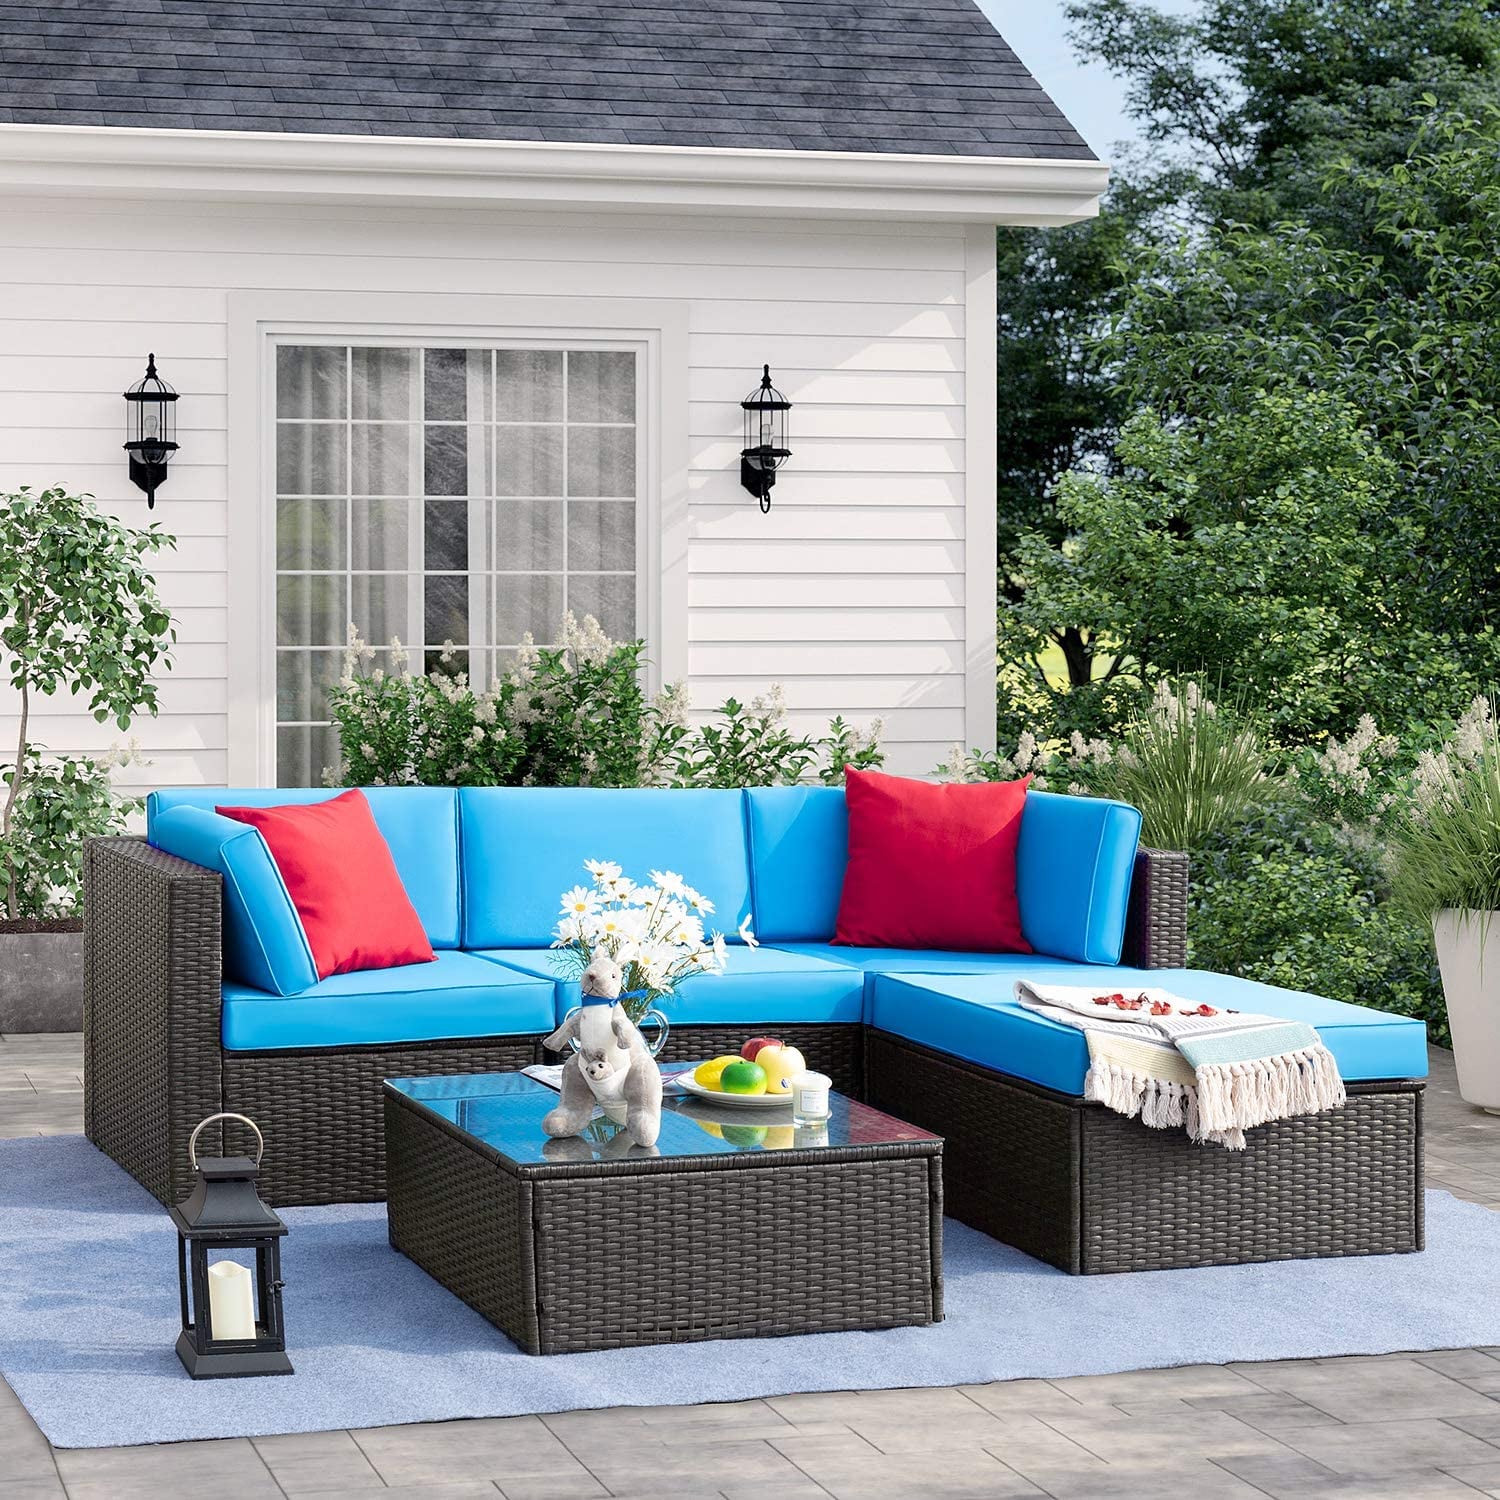 The 11 Best Places to Buy Outdoor Furniture in 2021